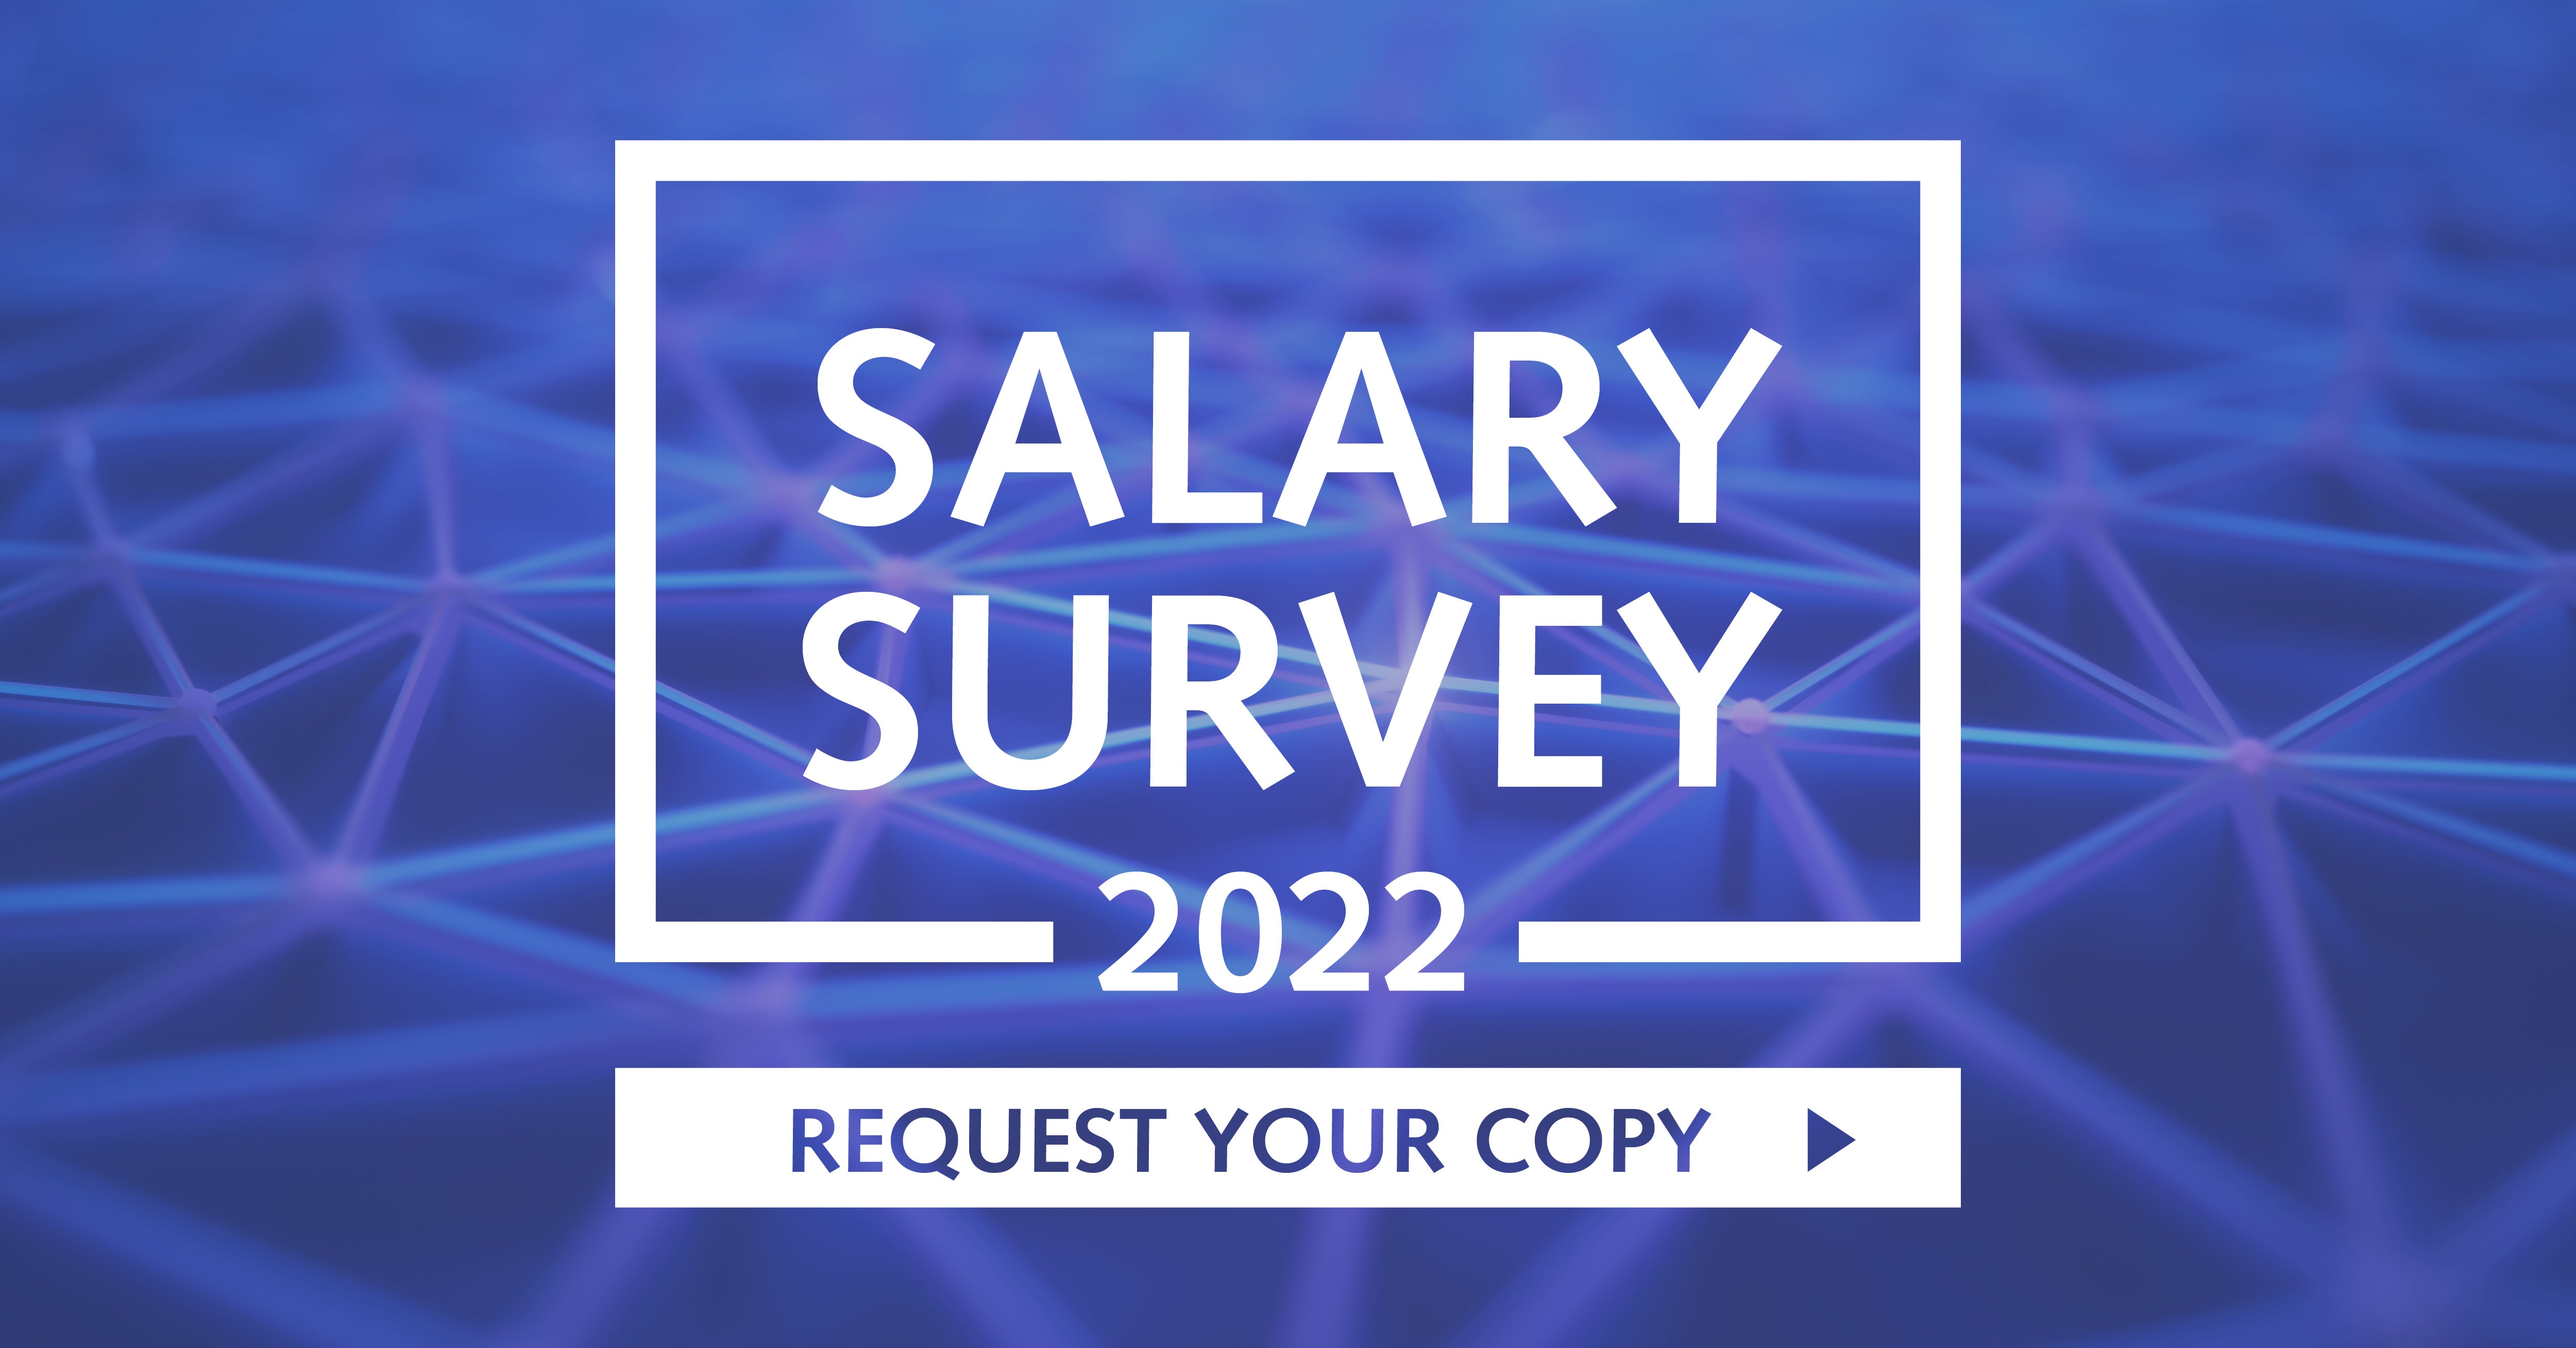 Robert Walters Salary and Recruitment Guide 2022